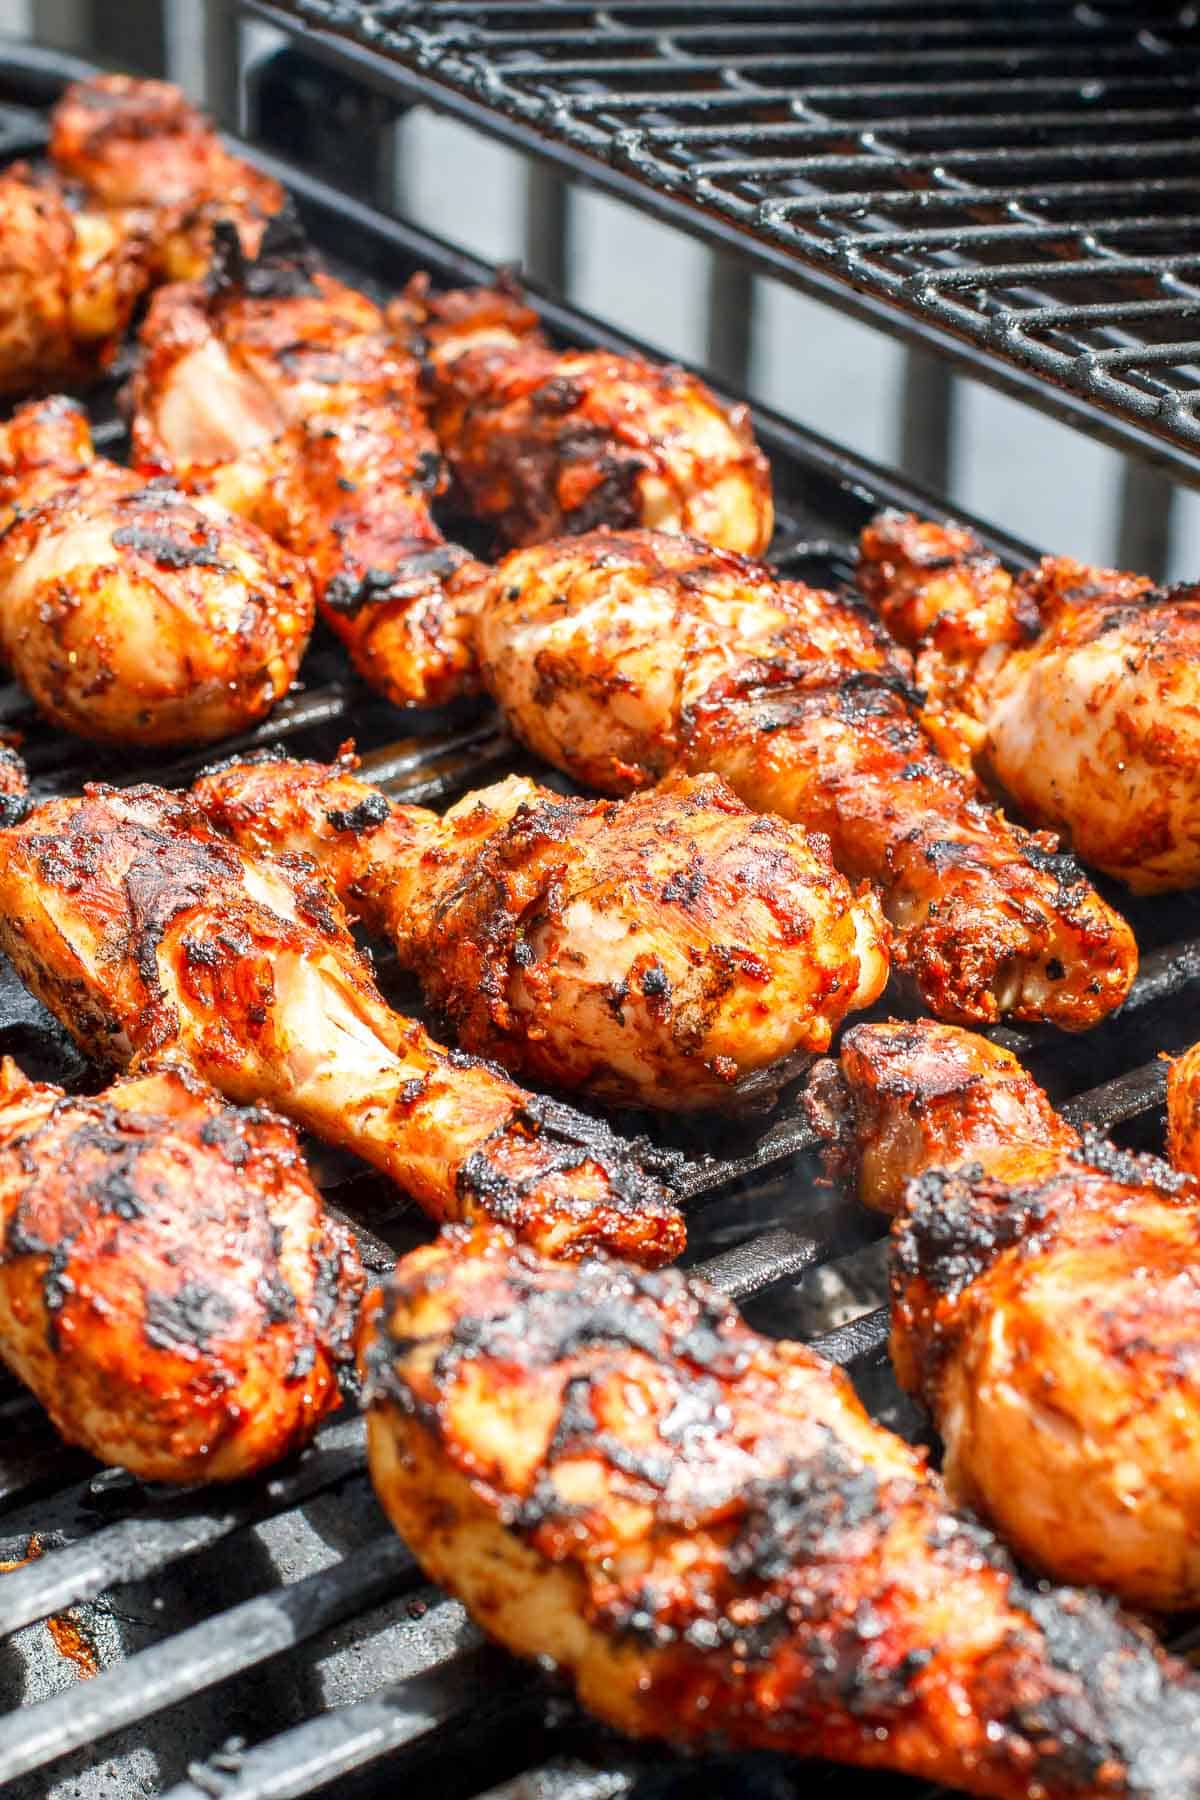 Marinated chicken drumsticks being grilled on a gas grill.